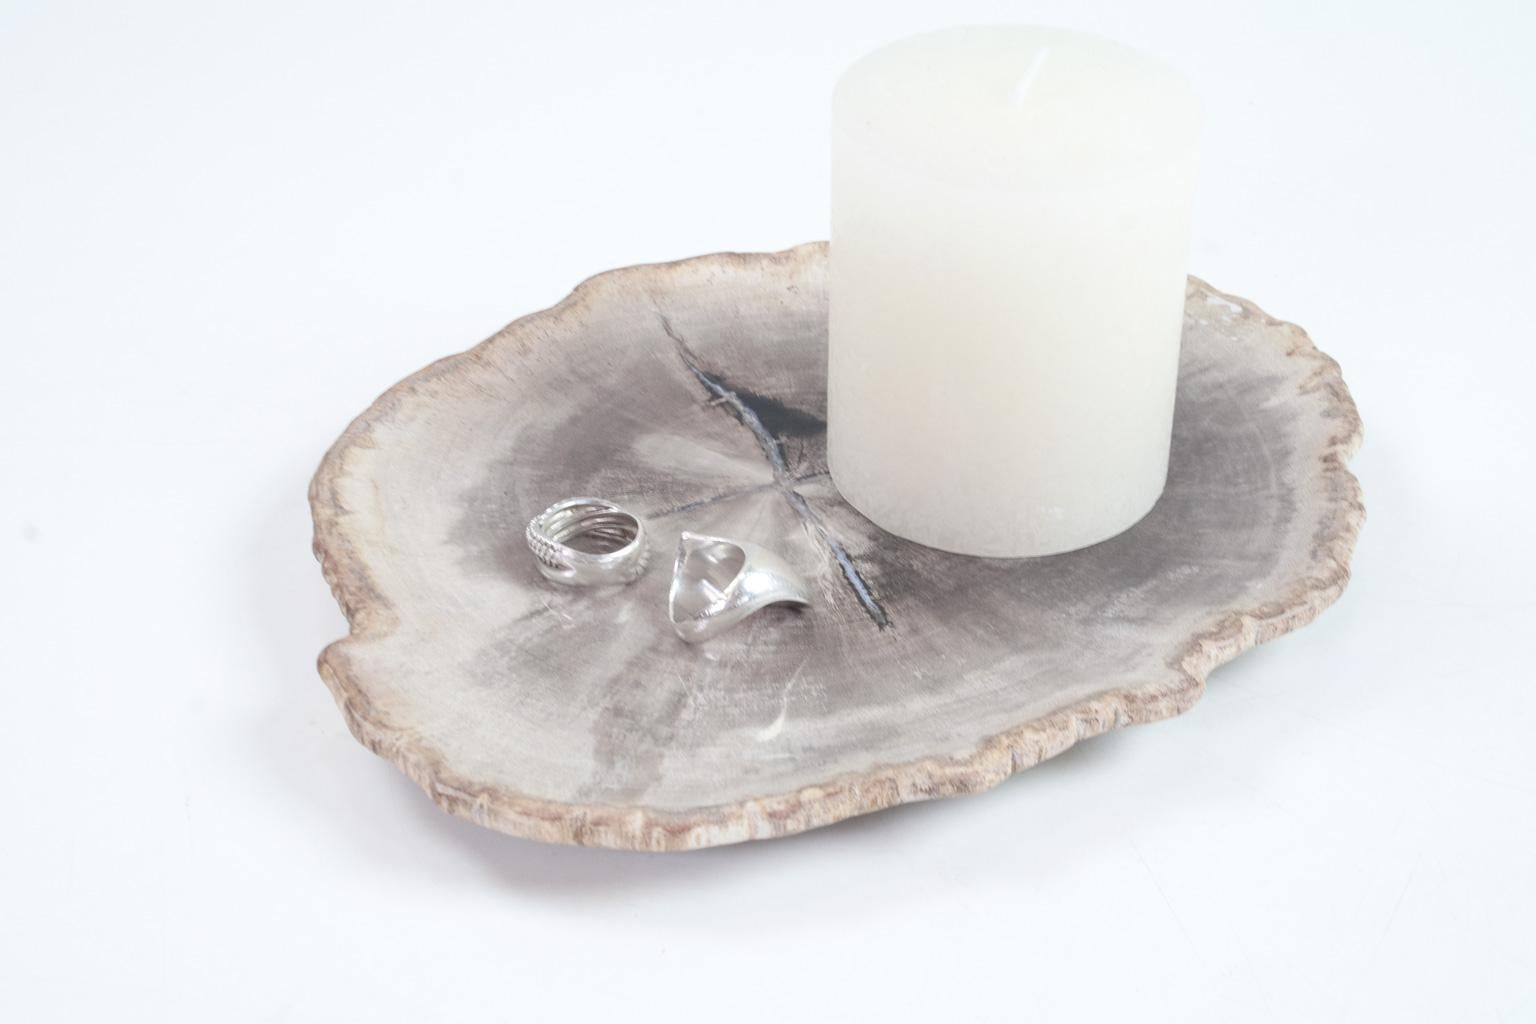 Petit petrified wooden plate or platter. Smooth sanded and polished on both sides. The soft anthracite / grey and beige tones paired with the scale make this an elegant and useful piece. The object still holds the organic and typically wooden tissue